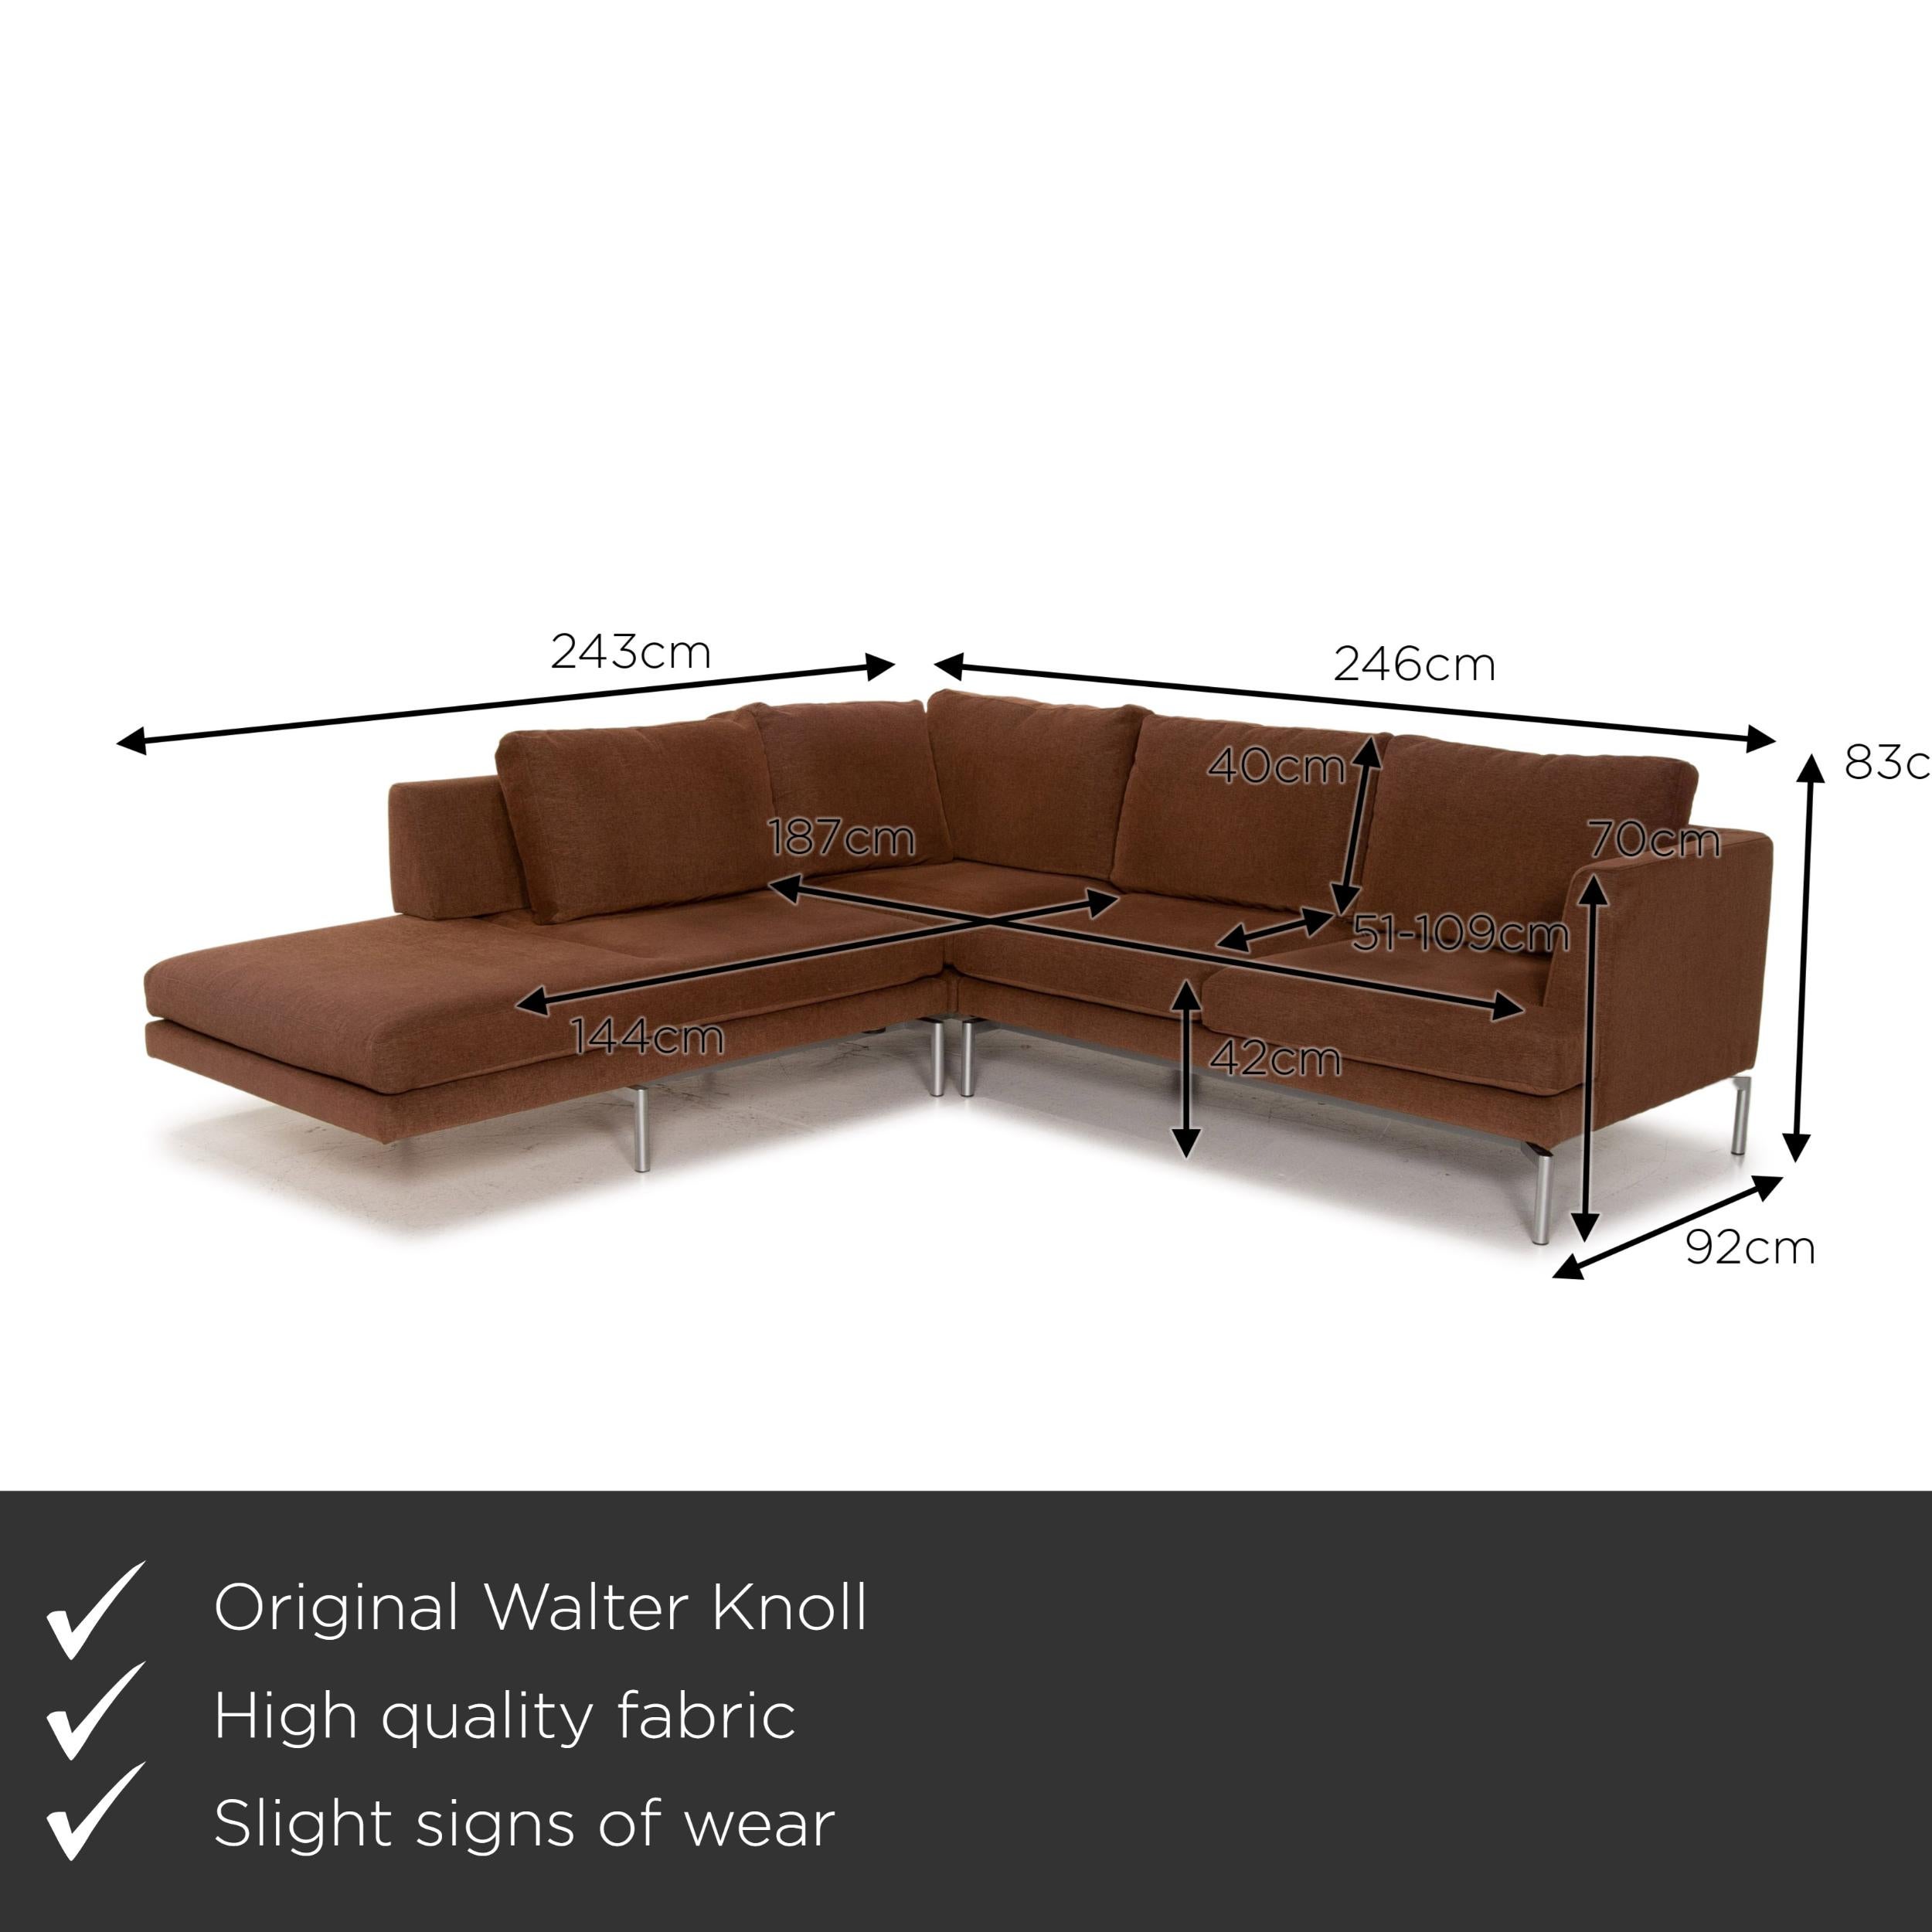 We present to you a Walter Knoll Good Times fabric corner sofa brown function couch.
 

 Product measurements in centimeters:
 

Depth 243
Width 243
Height 83
Seat height 42
Rest height 70
Seat depth 51
Seat width 141
Back height 40.
 